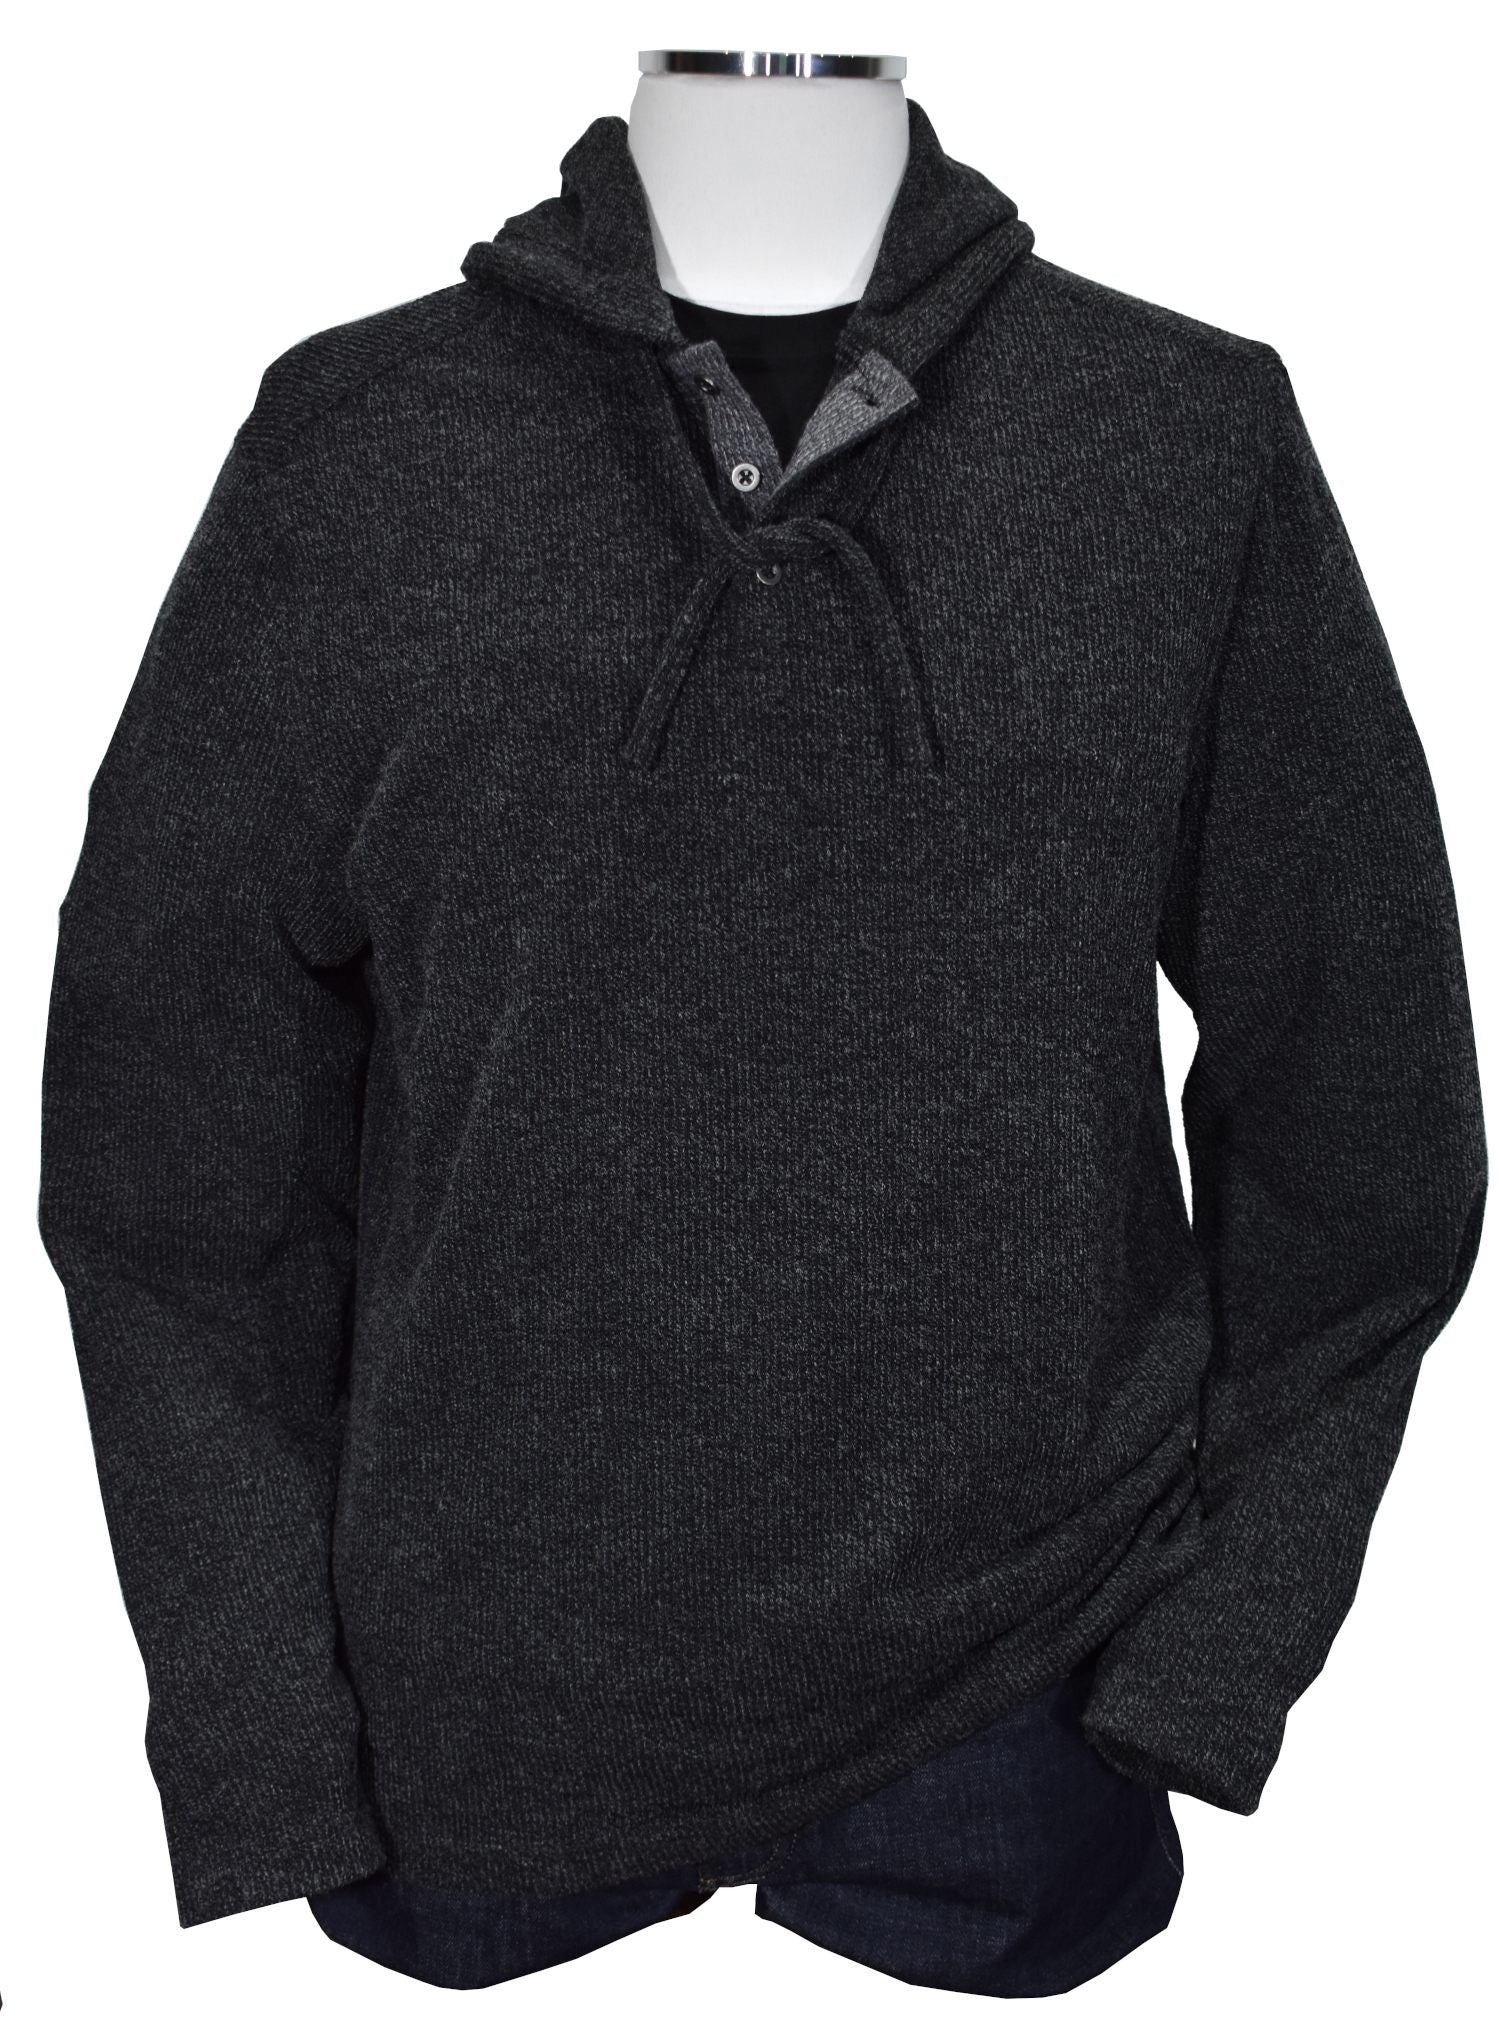 Let your style be as cozy as can be with the ZN1490 Bucle Ultra Hoodie – made from silky-soft poly microfiber and spandex for the comfiest fit. Its contemporary image and two-toned fabric weave adds a touch of fashion to your look. Not to mention, it looks and feels great too! Classic fit.